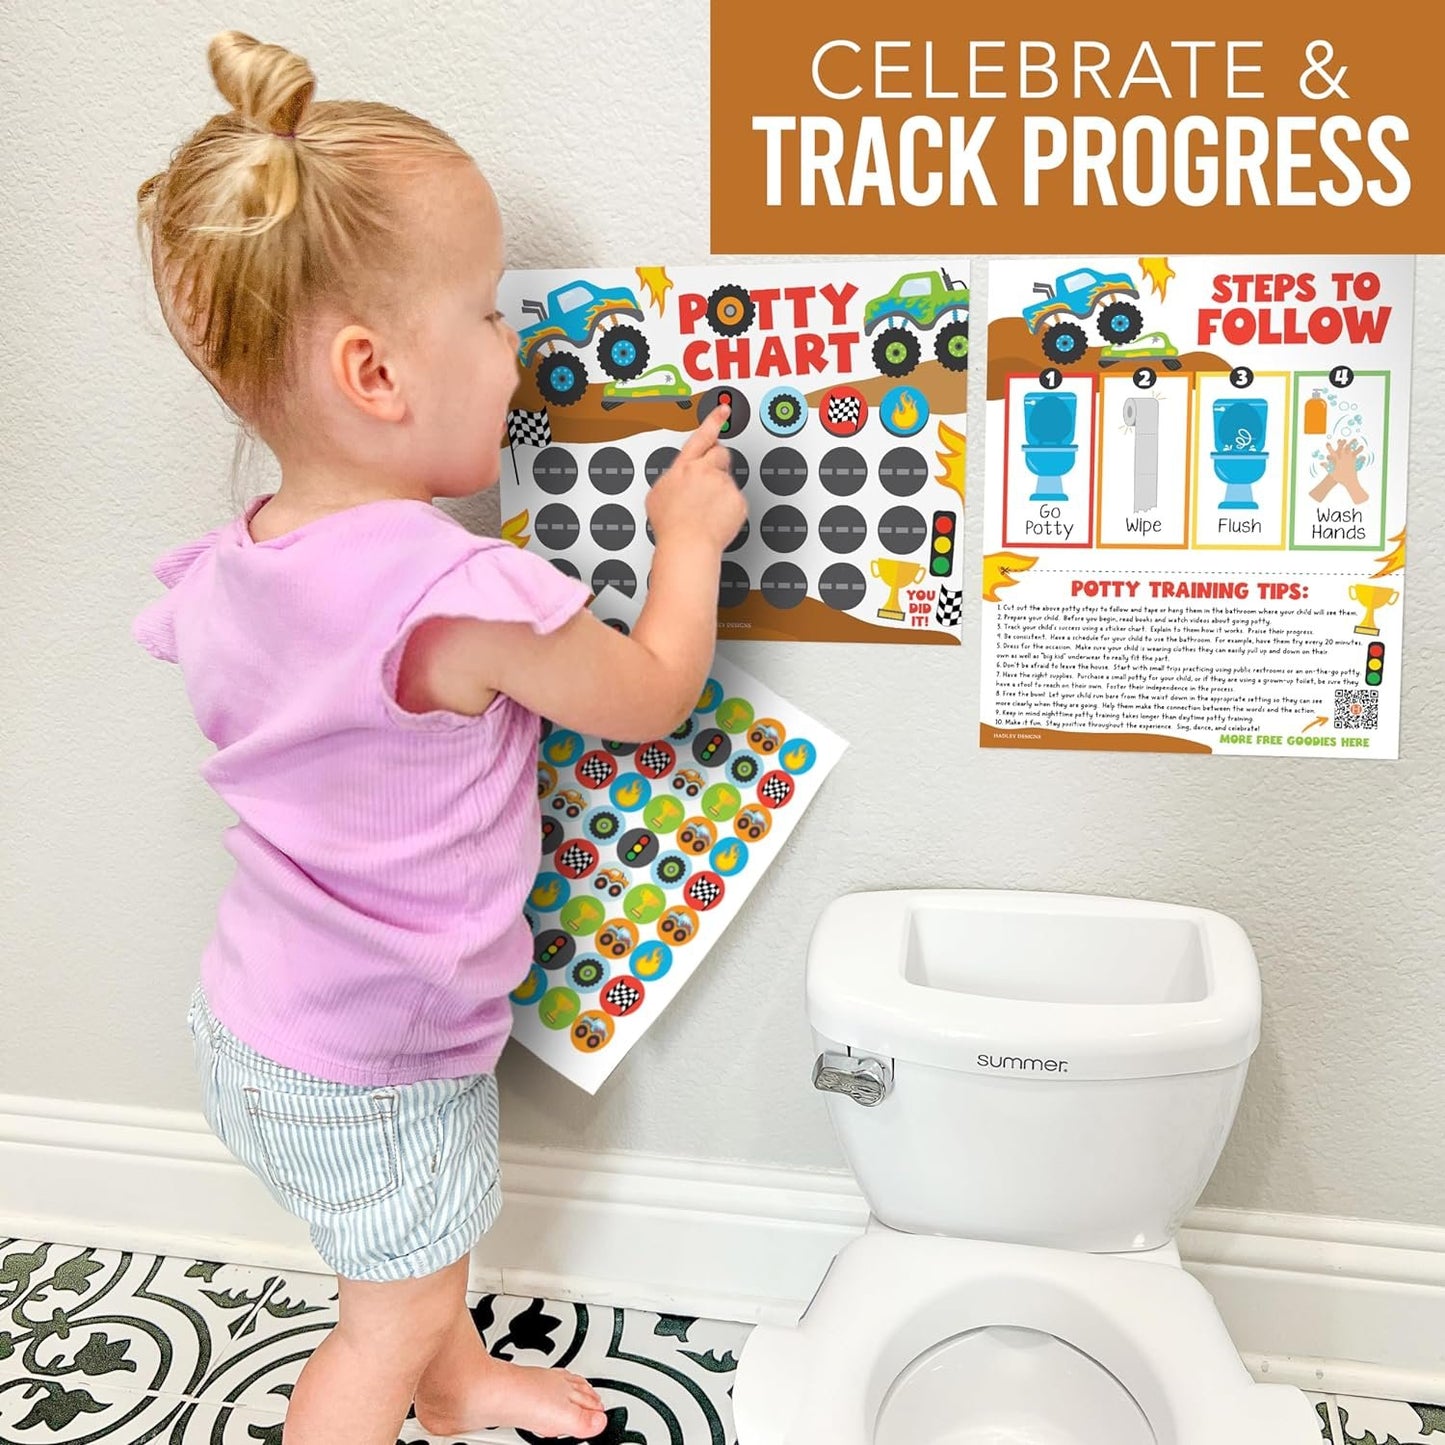 Truck Potty Training Chart for Toddlers Boys - Potty Chart for Boys with Stickers, Sticker Chart for Kids Potty Training Chart for Toddlers Boys, Potty Sticker Chart for Toddlers Boy, Potty Rewards